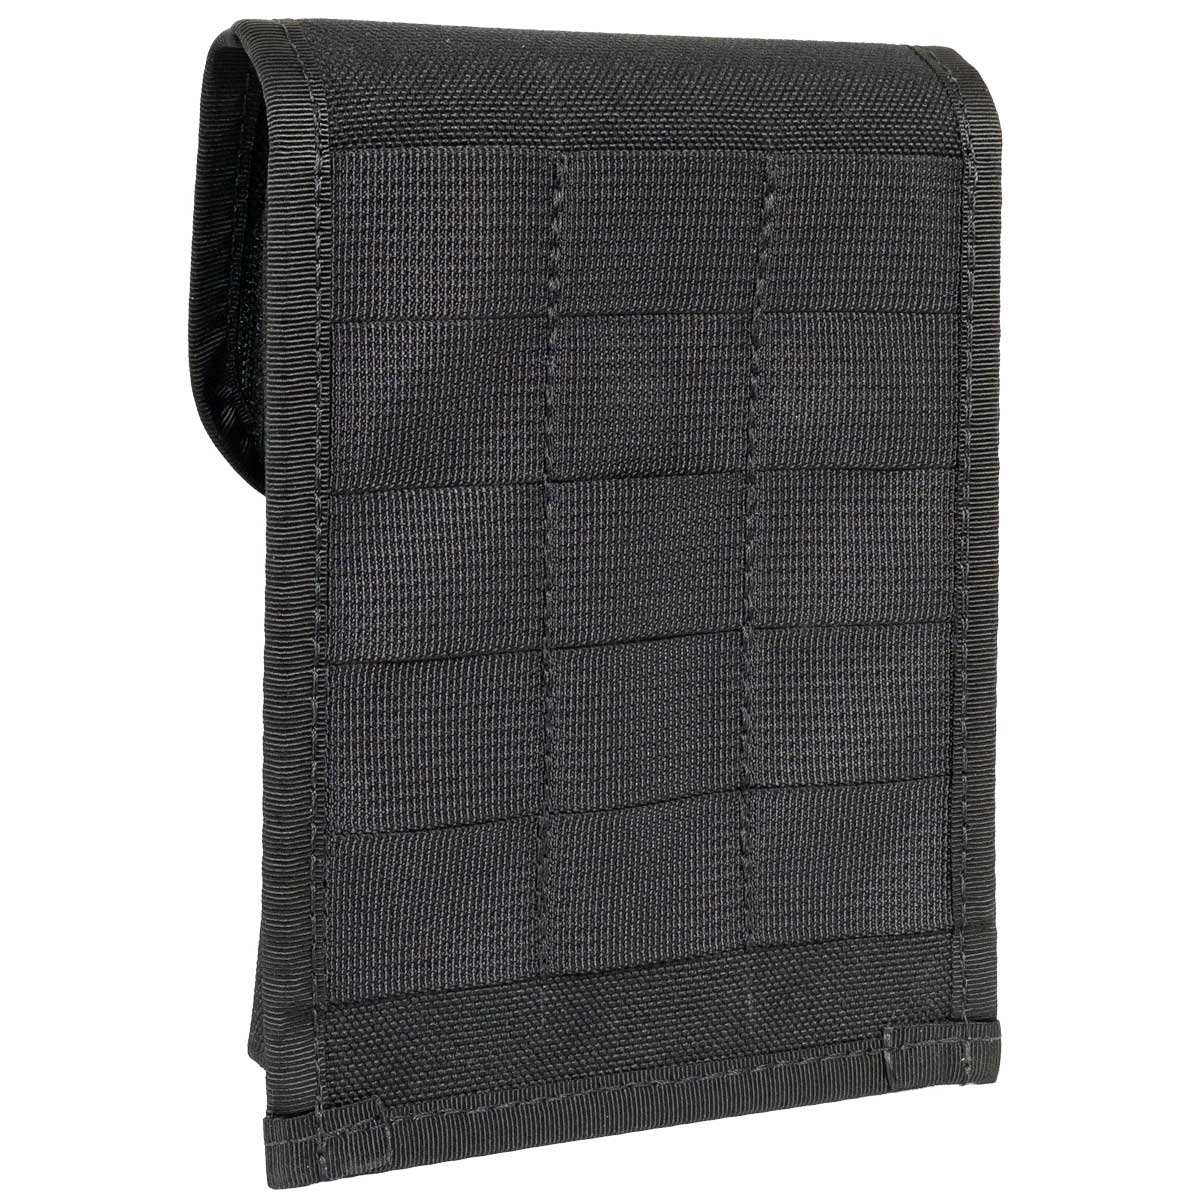 Large Utility MOLLE Pocket with Molle Attachment for Cowell Tactical Vests